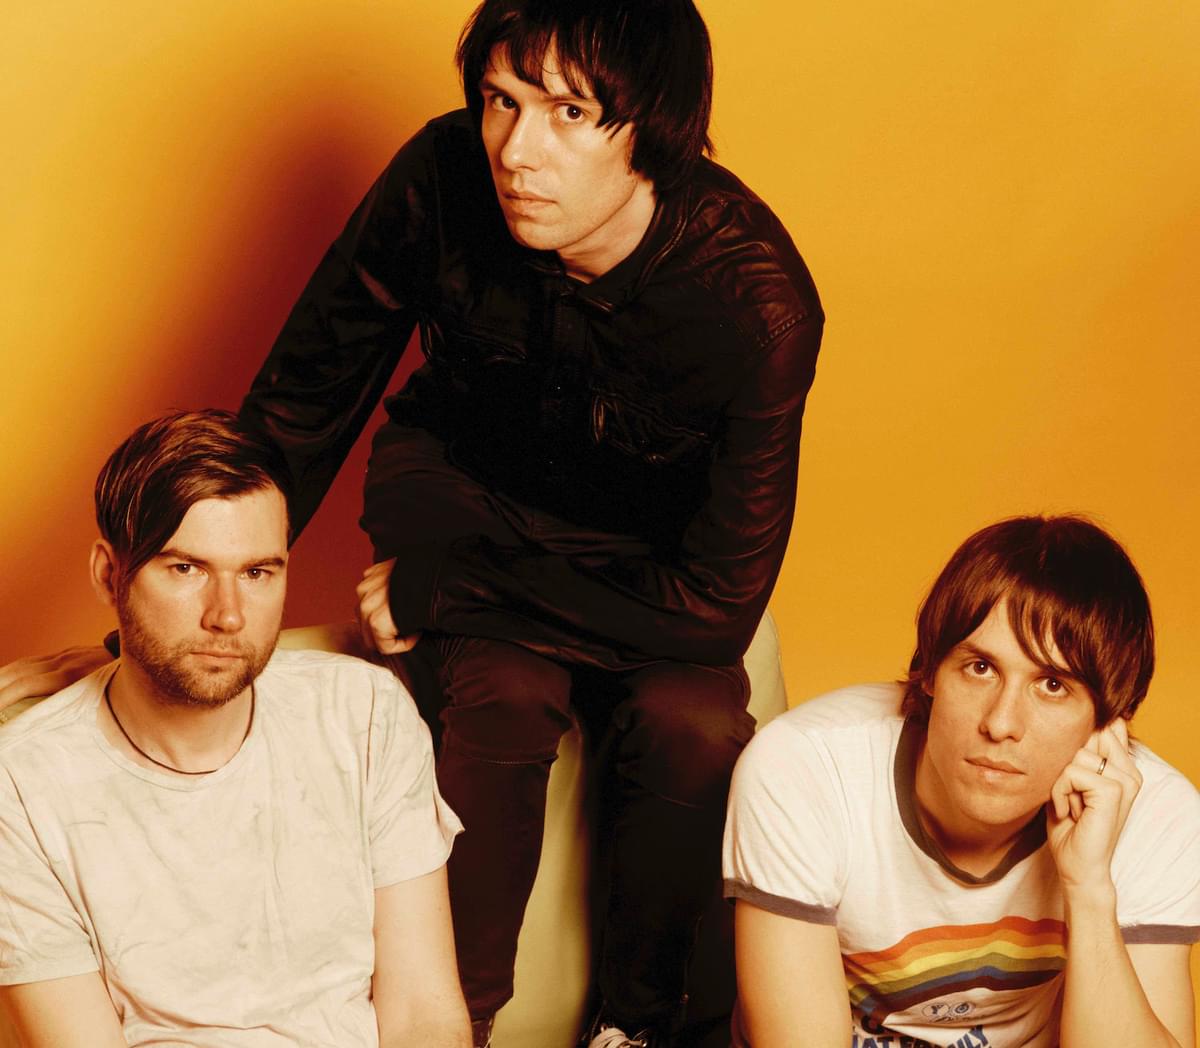 The cribs never thought id feel again